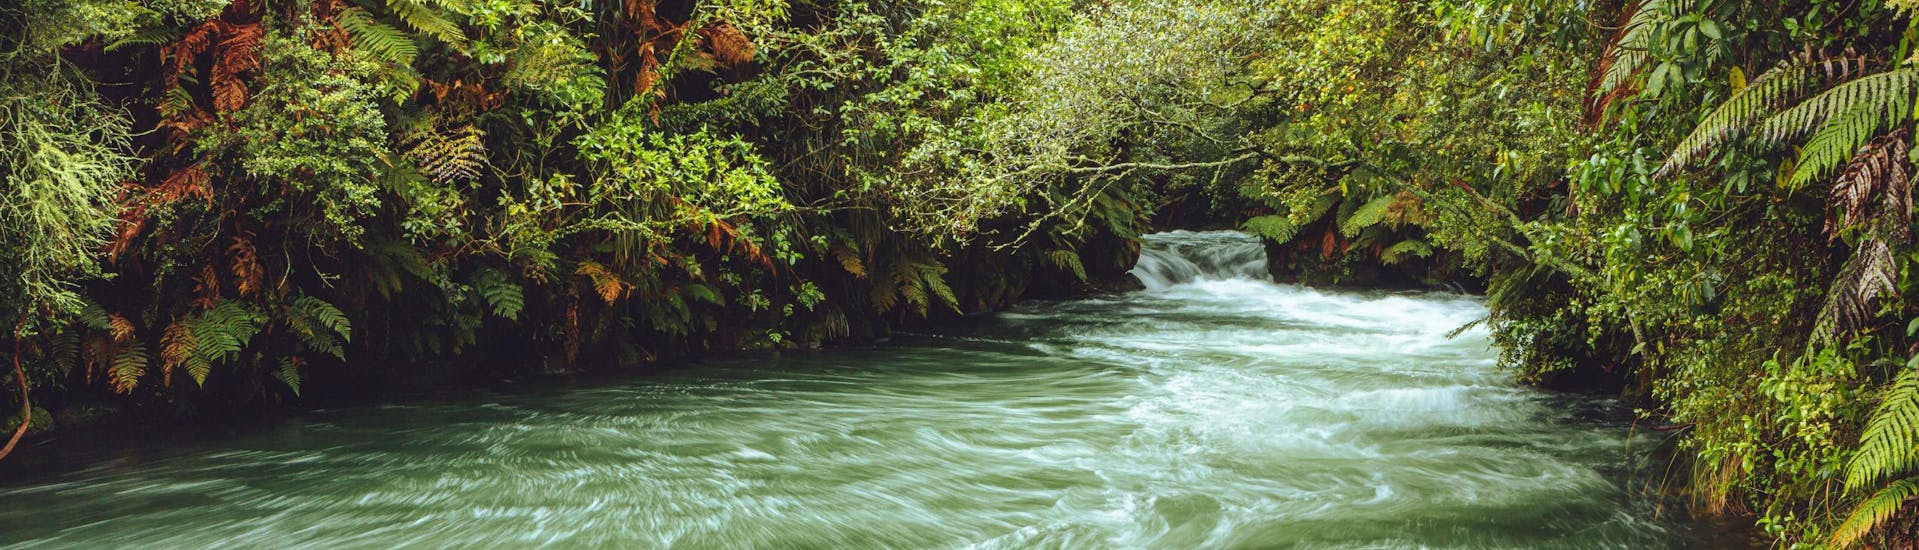 An image of the rousing Kaituna River in the region of Rotorua, a popular hotspot for white water rafting.